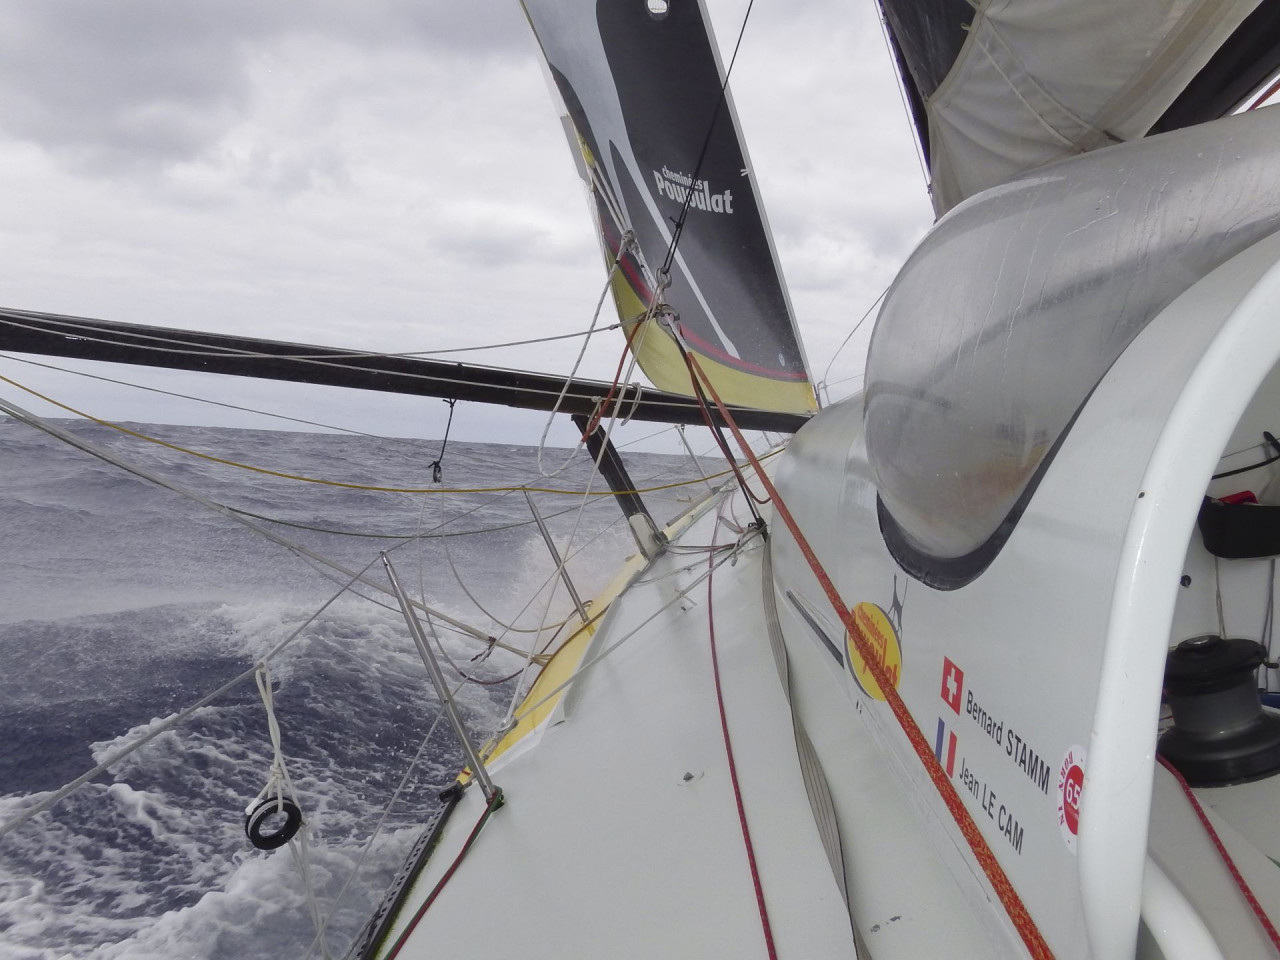 All in the Atlantic. Under 2000 miles to finish for Stamm & Le Cam.